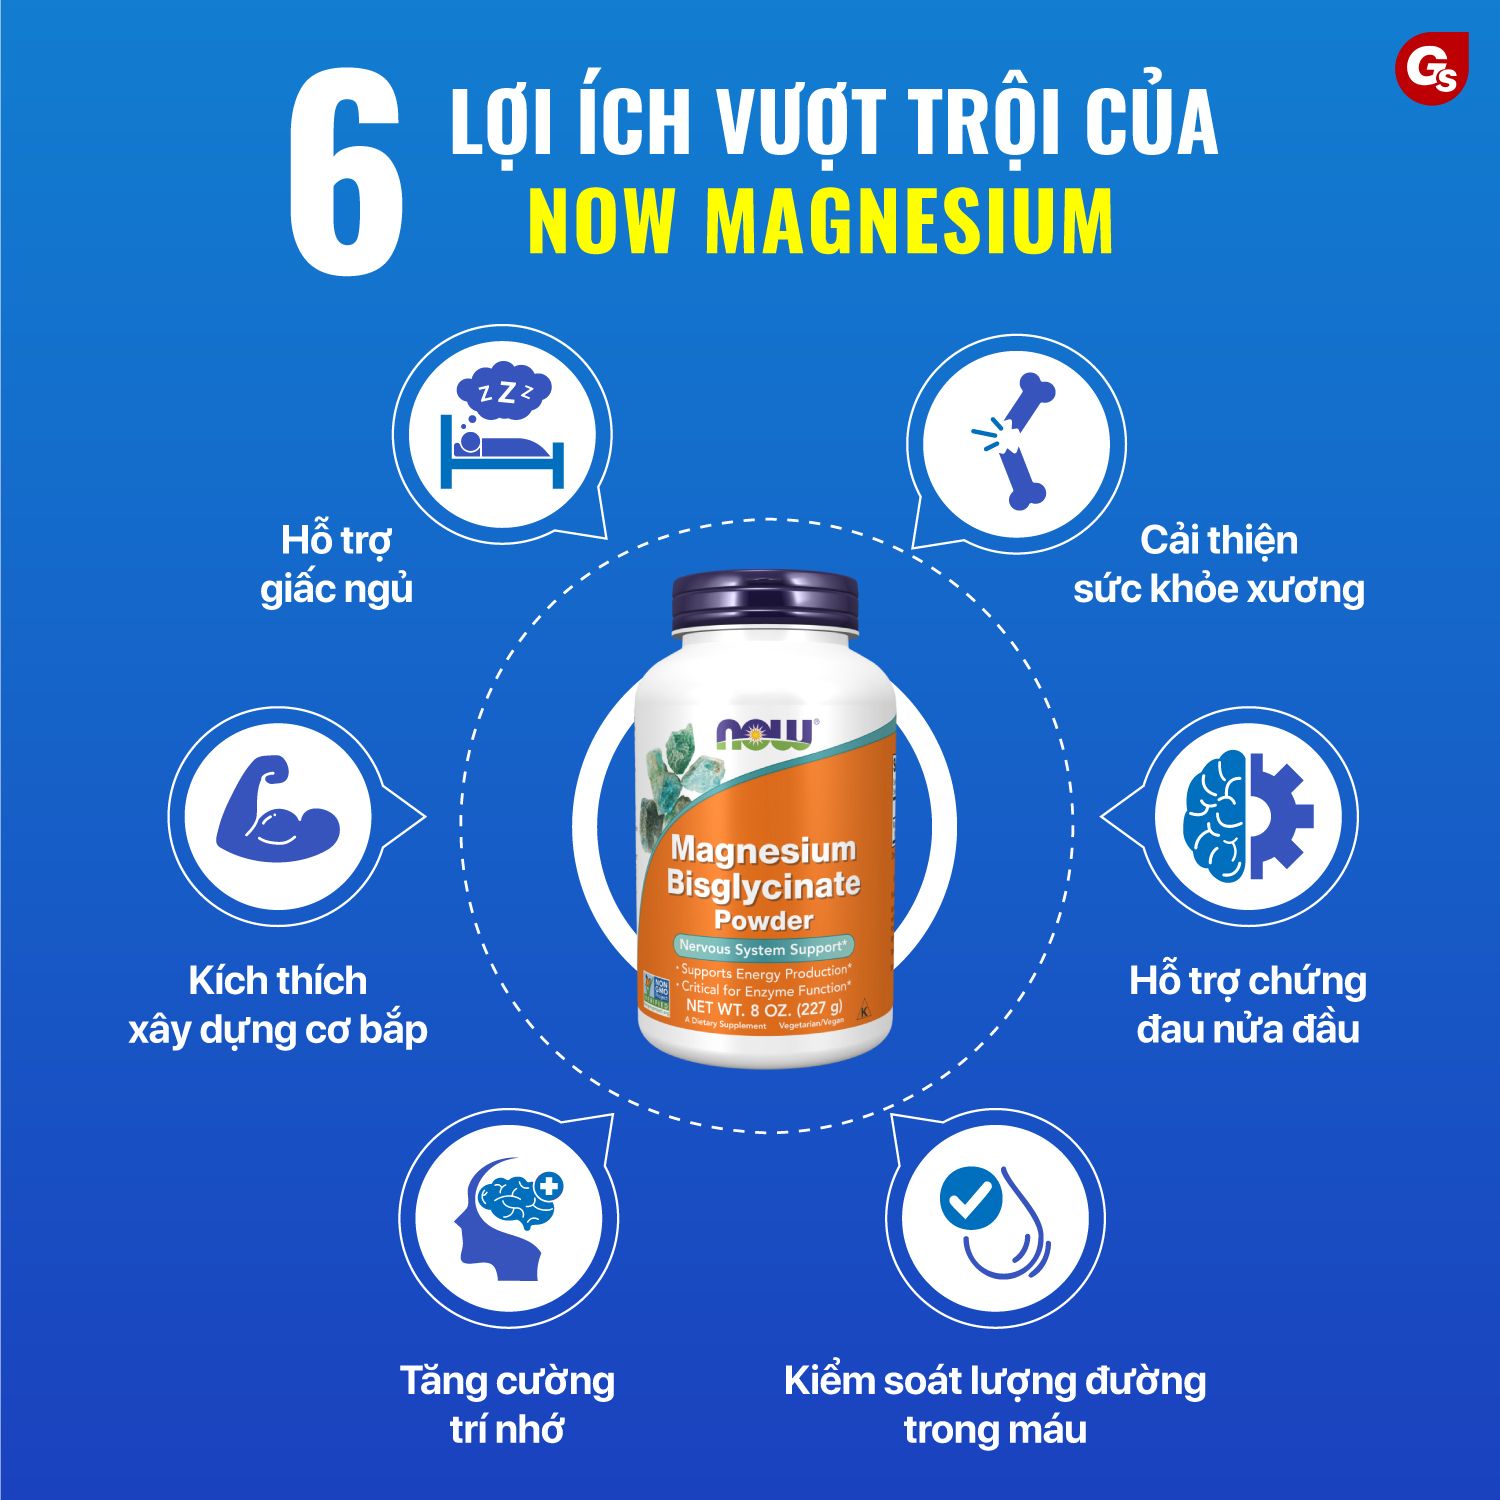 now-magnesium-bisglycinate-powder-bot-uong-bo-sung-magie-gymstore-5